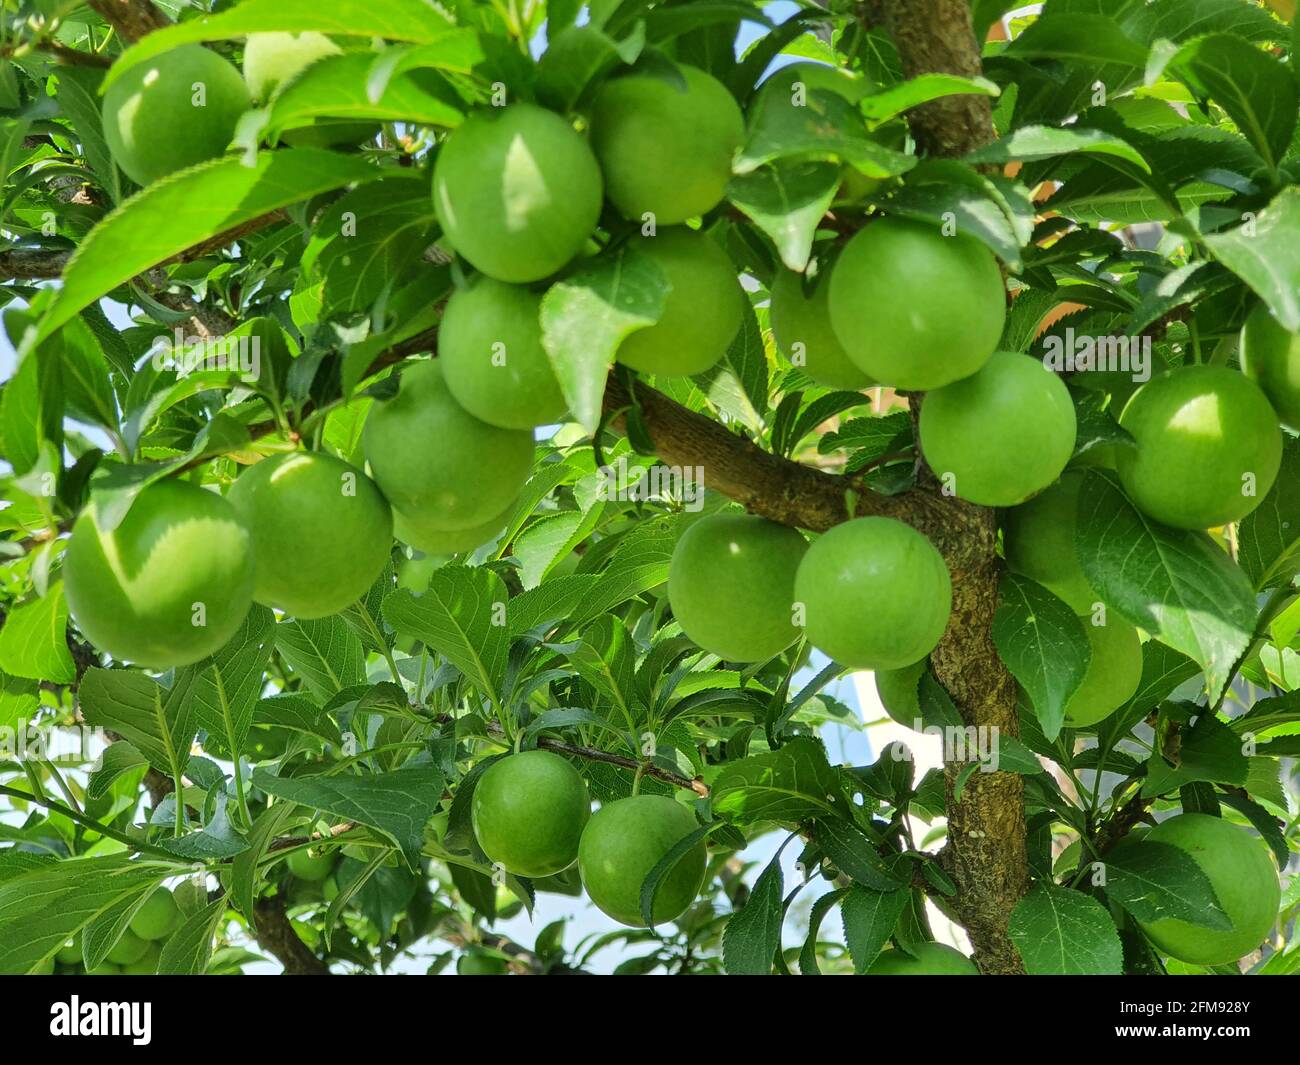 Green apple hanging on a tree Stock Photo